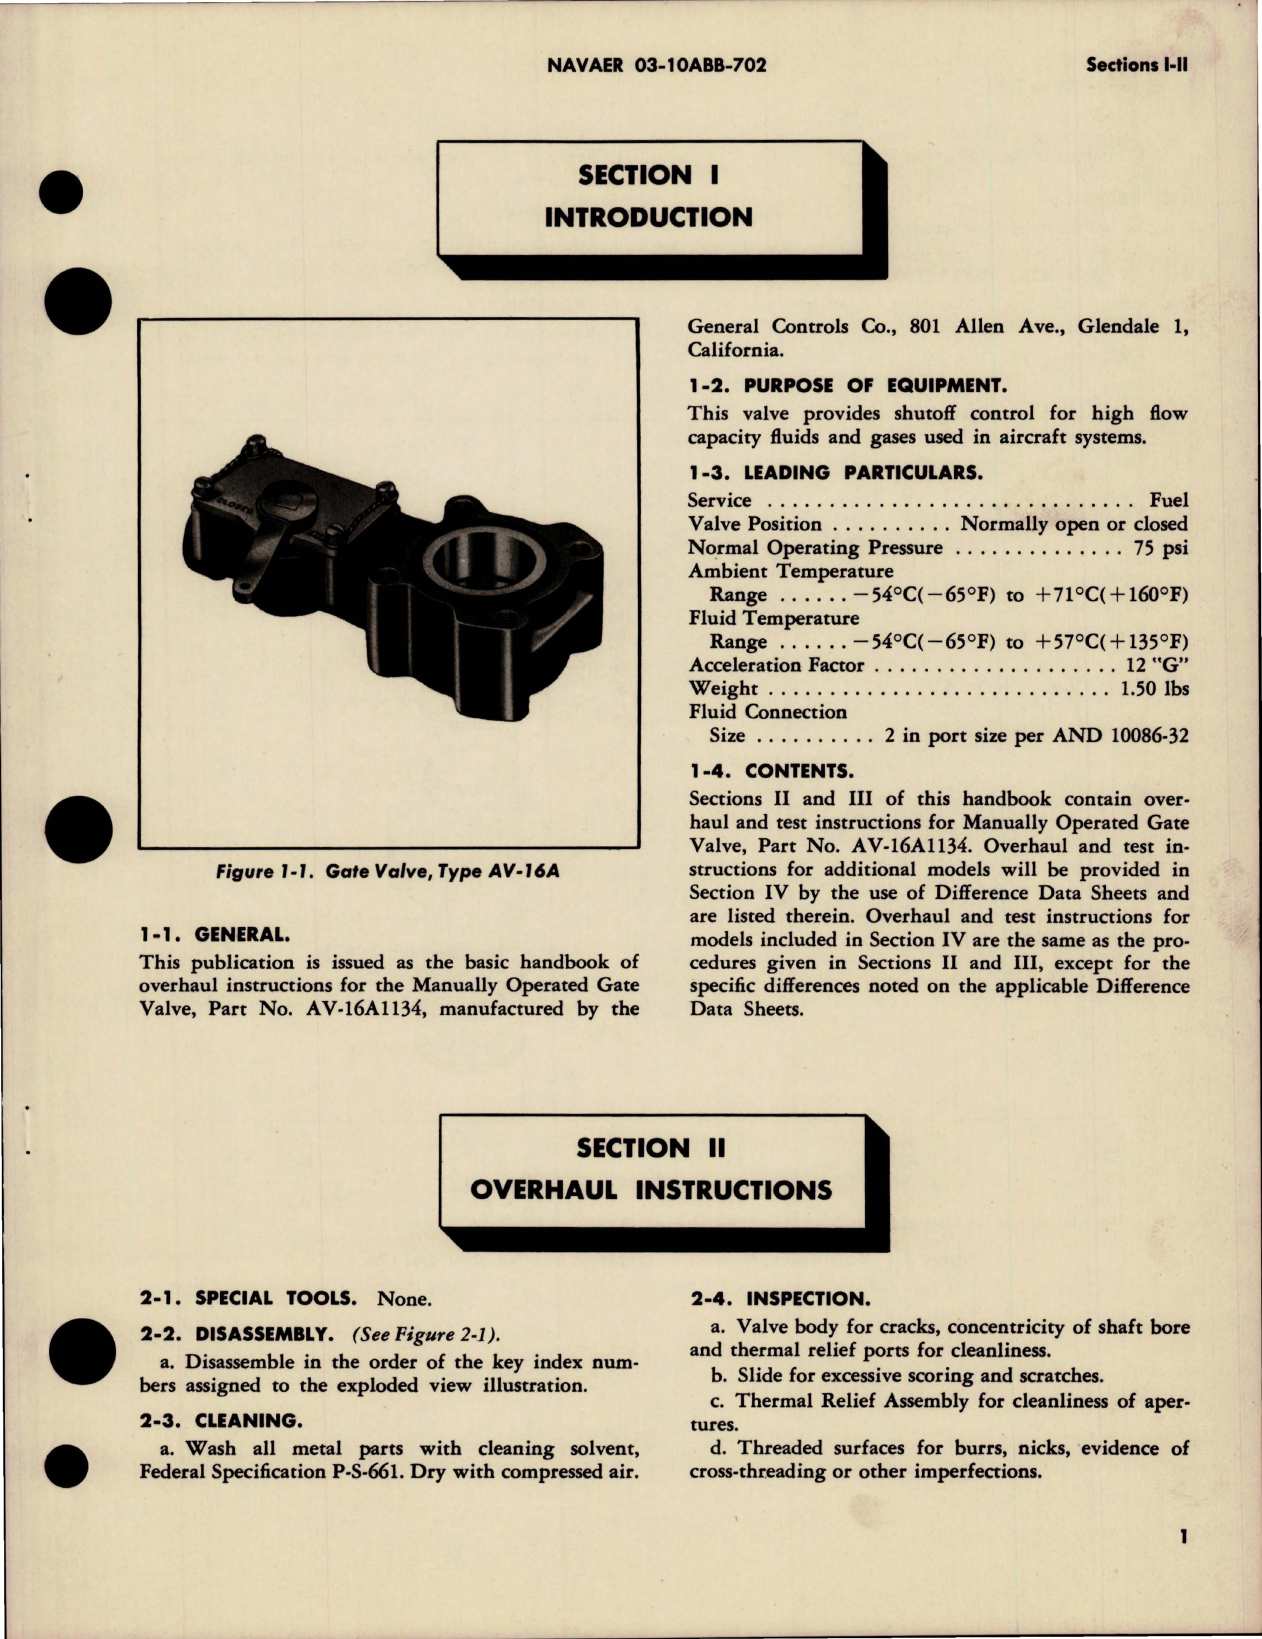 Sample page 5 from AirCorps Library document: Overhaul Instructions for Manually Operated Gate Valve - AV-16A Series - Part AV-16A1134 